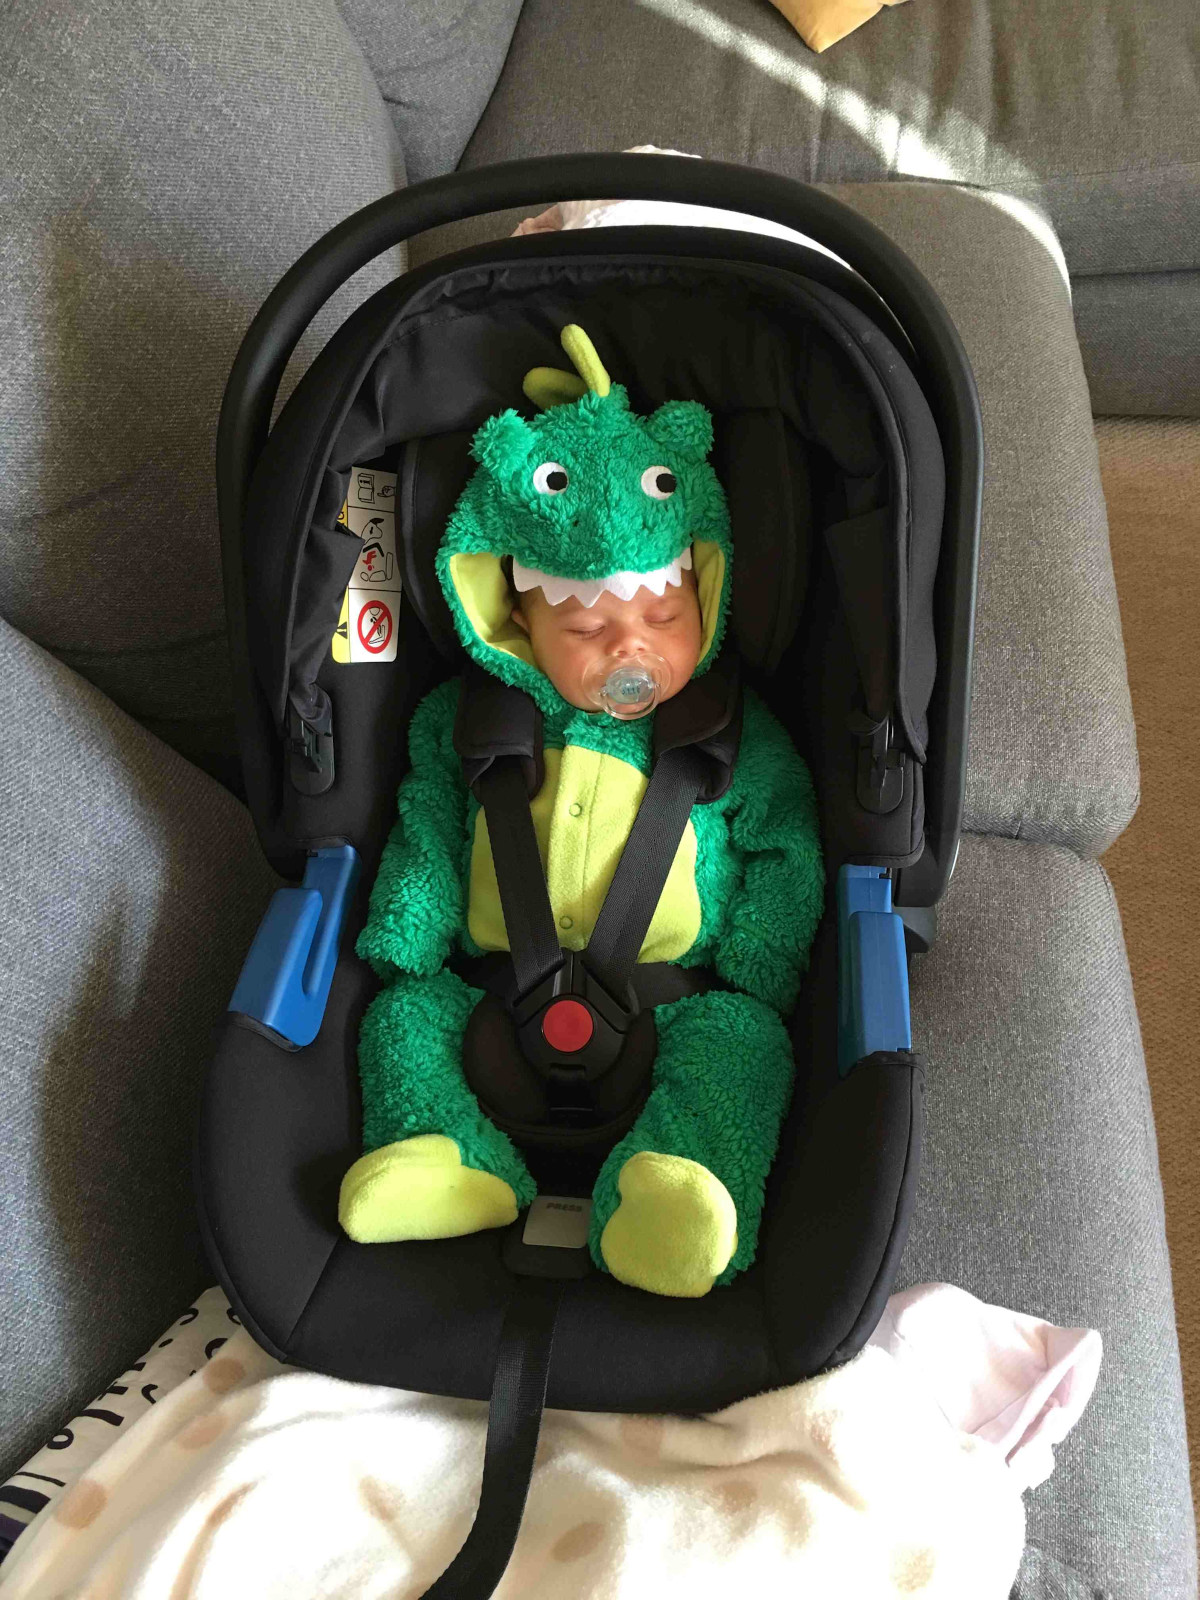 My daughter dressed as a dinosaur sitting in car seat